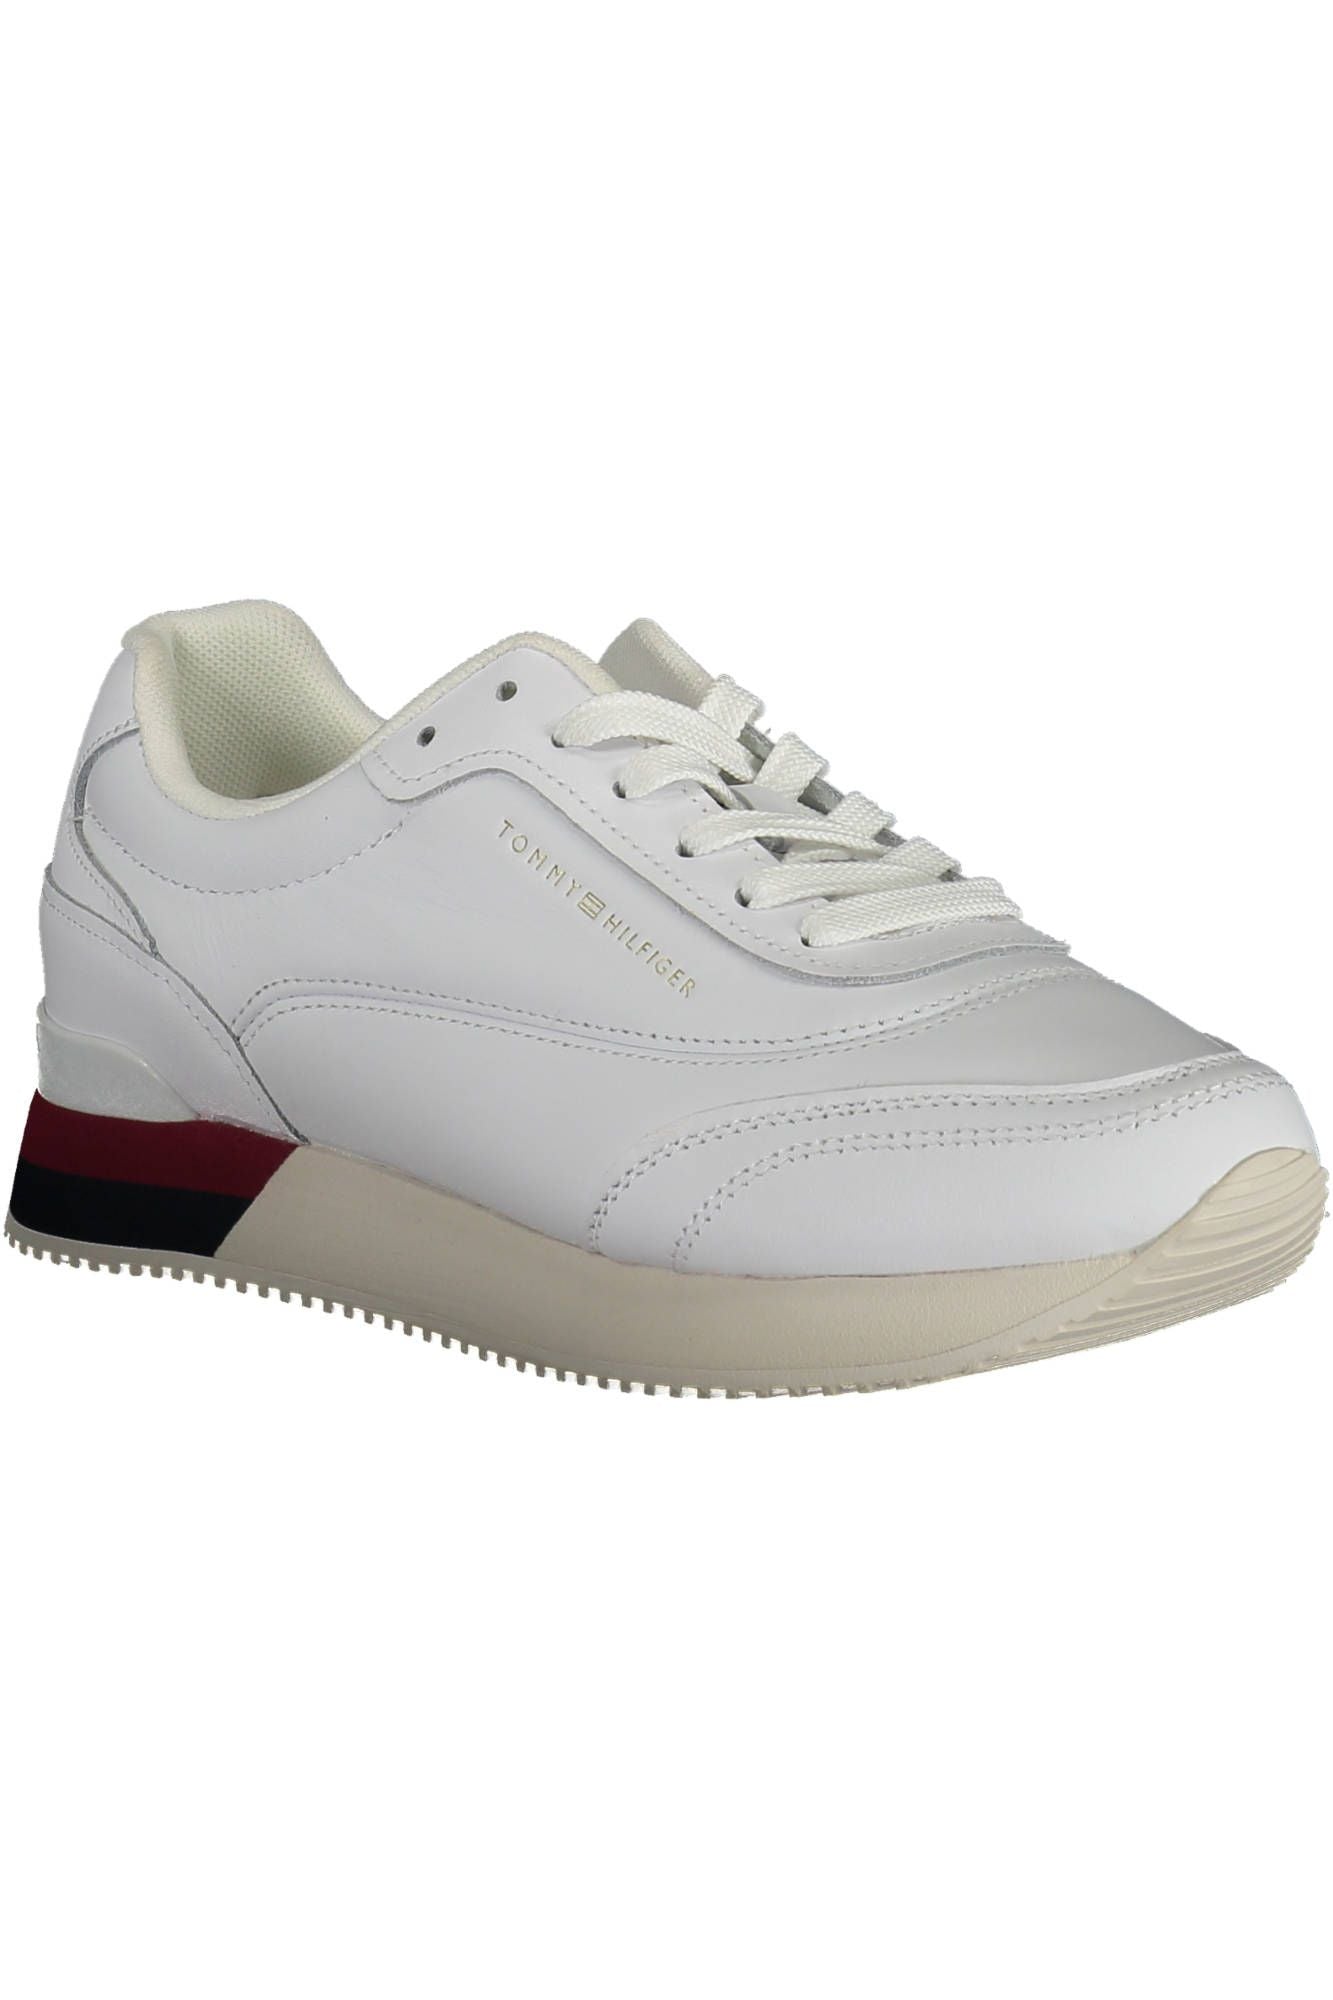 Tommy Hilfiger Chic White Lace-Up Sneakers with Logo Detail